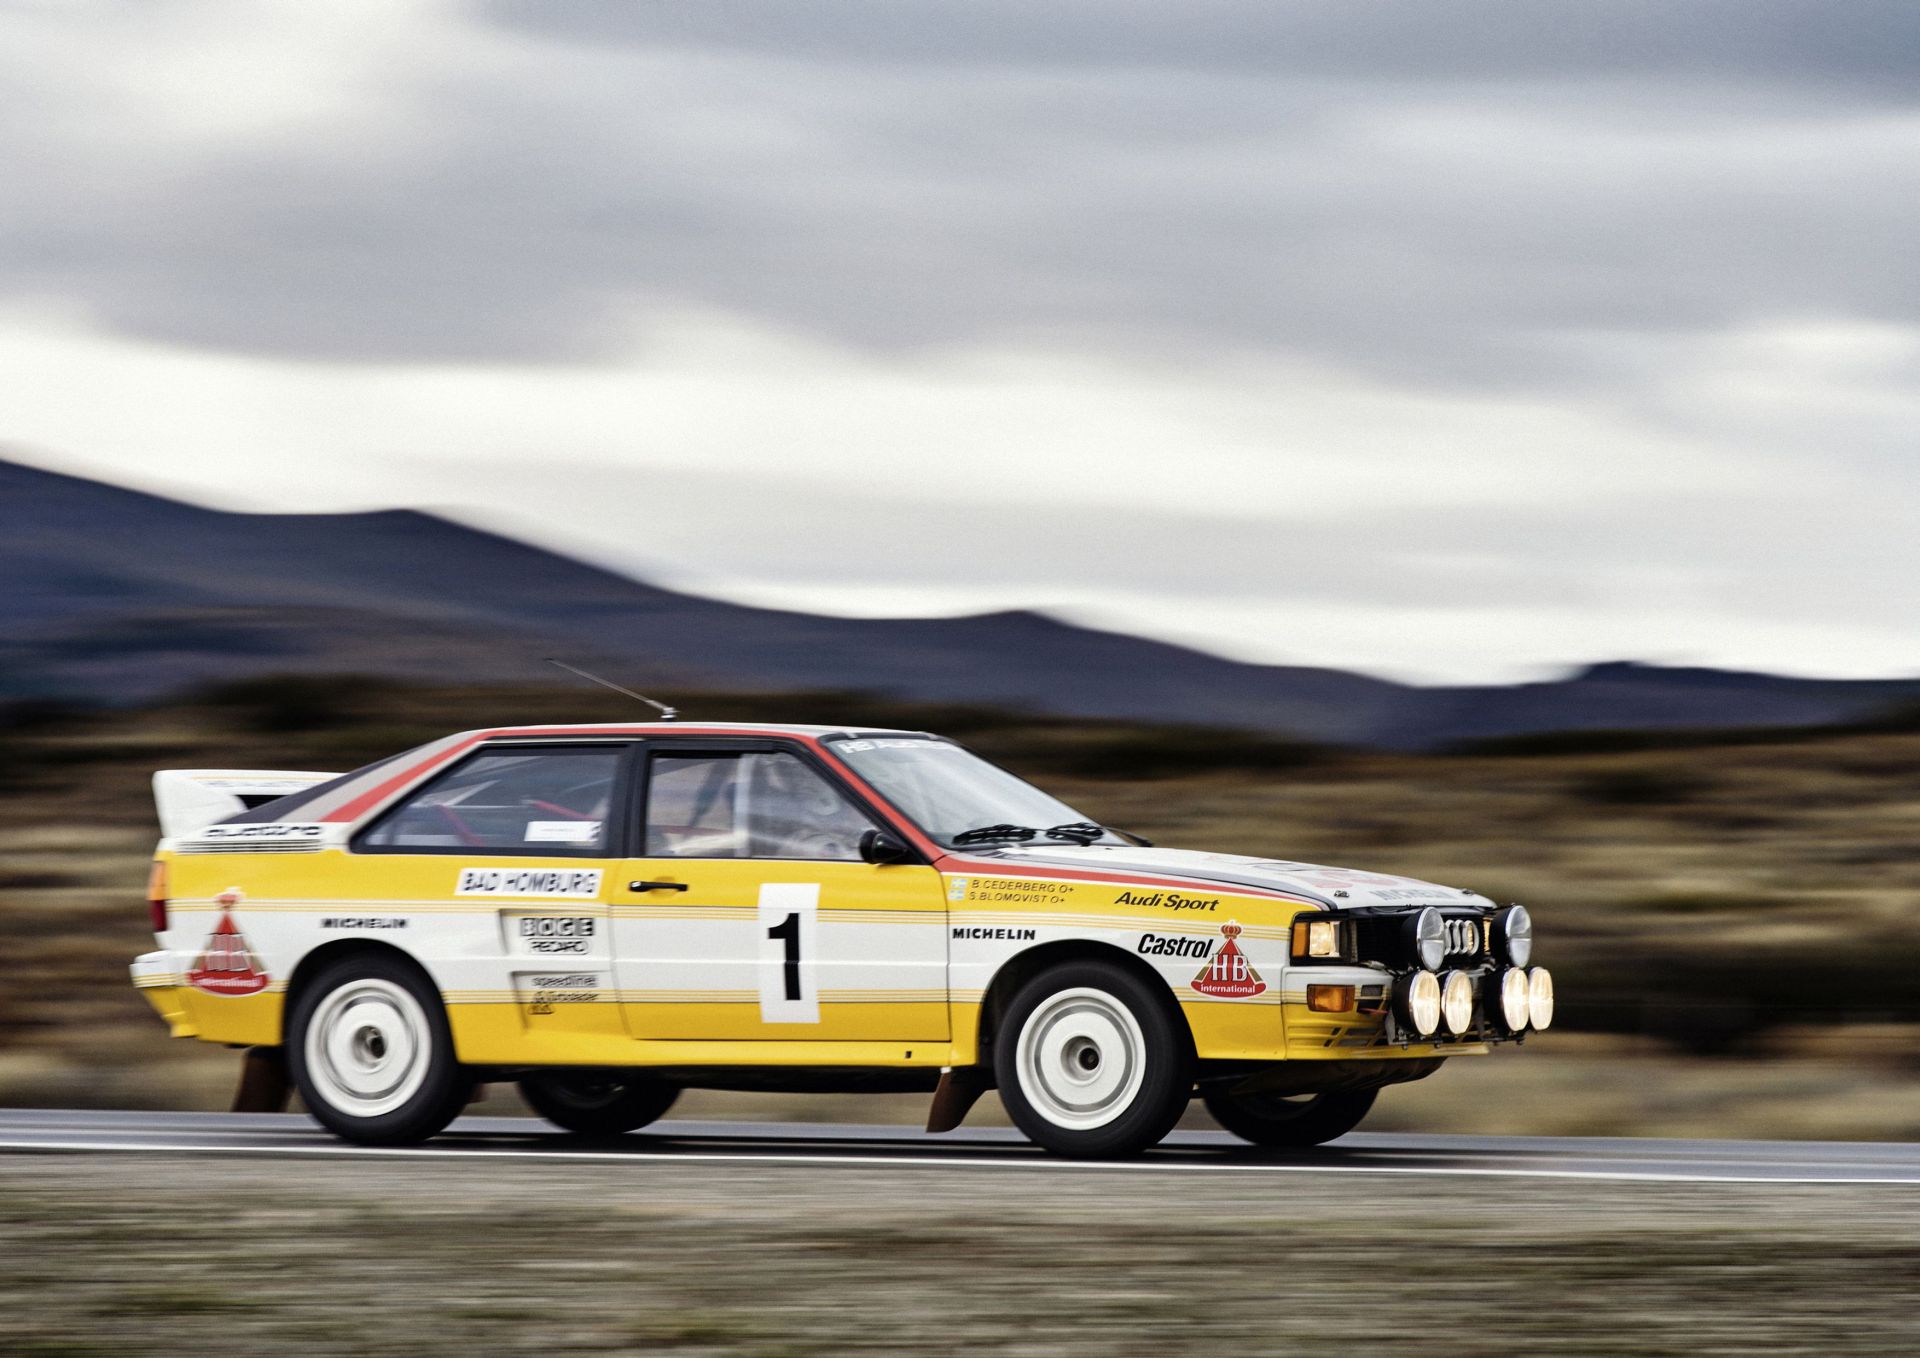 1983: five-cylinder engine triumphant in rallying